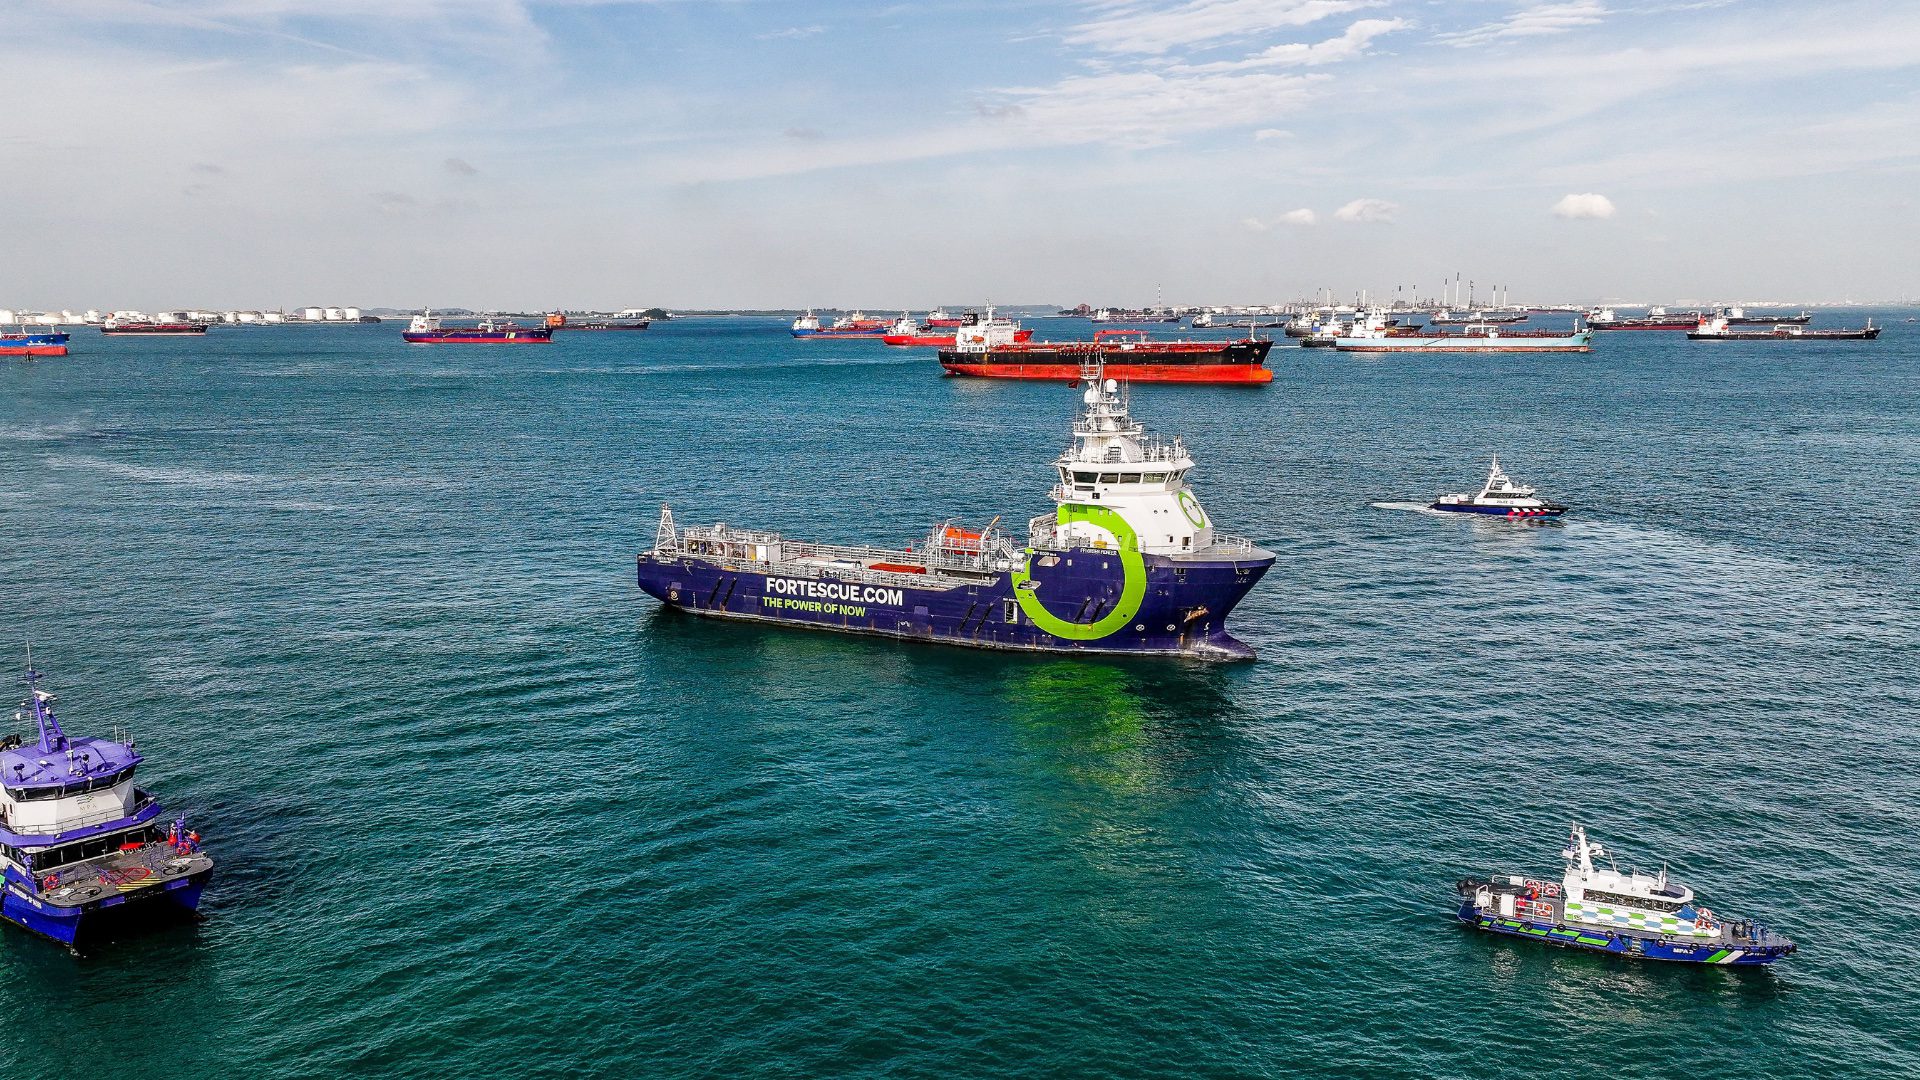 The Fortescue Green Pioneer pictured in the Port of Singapore. Photo courtesy Fortescue